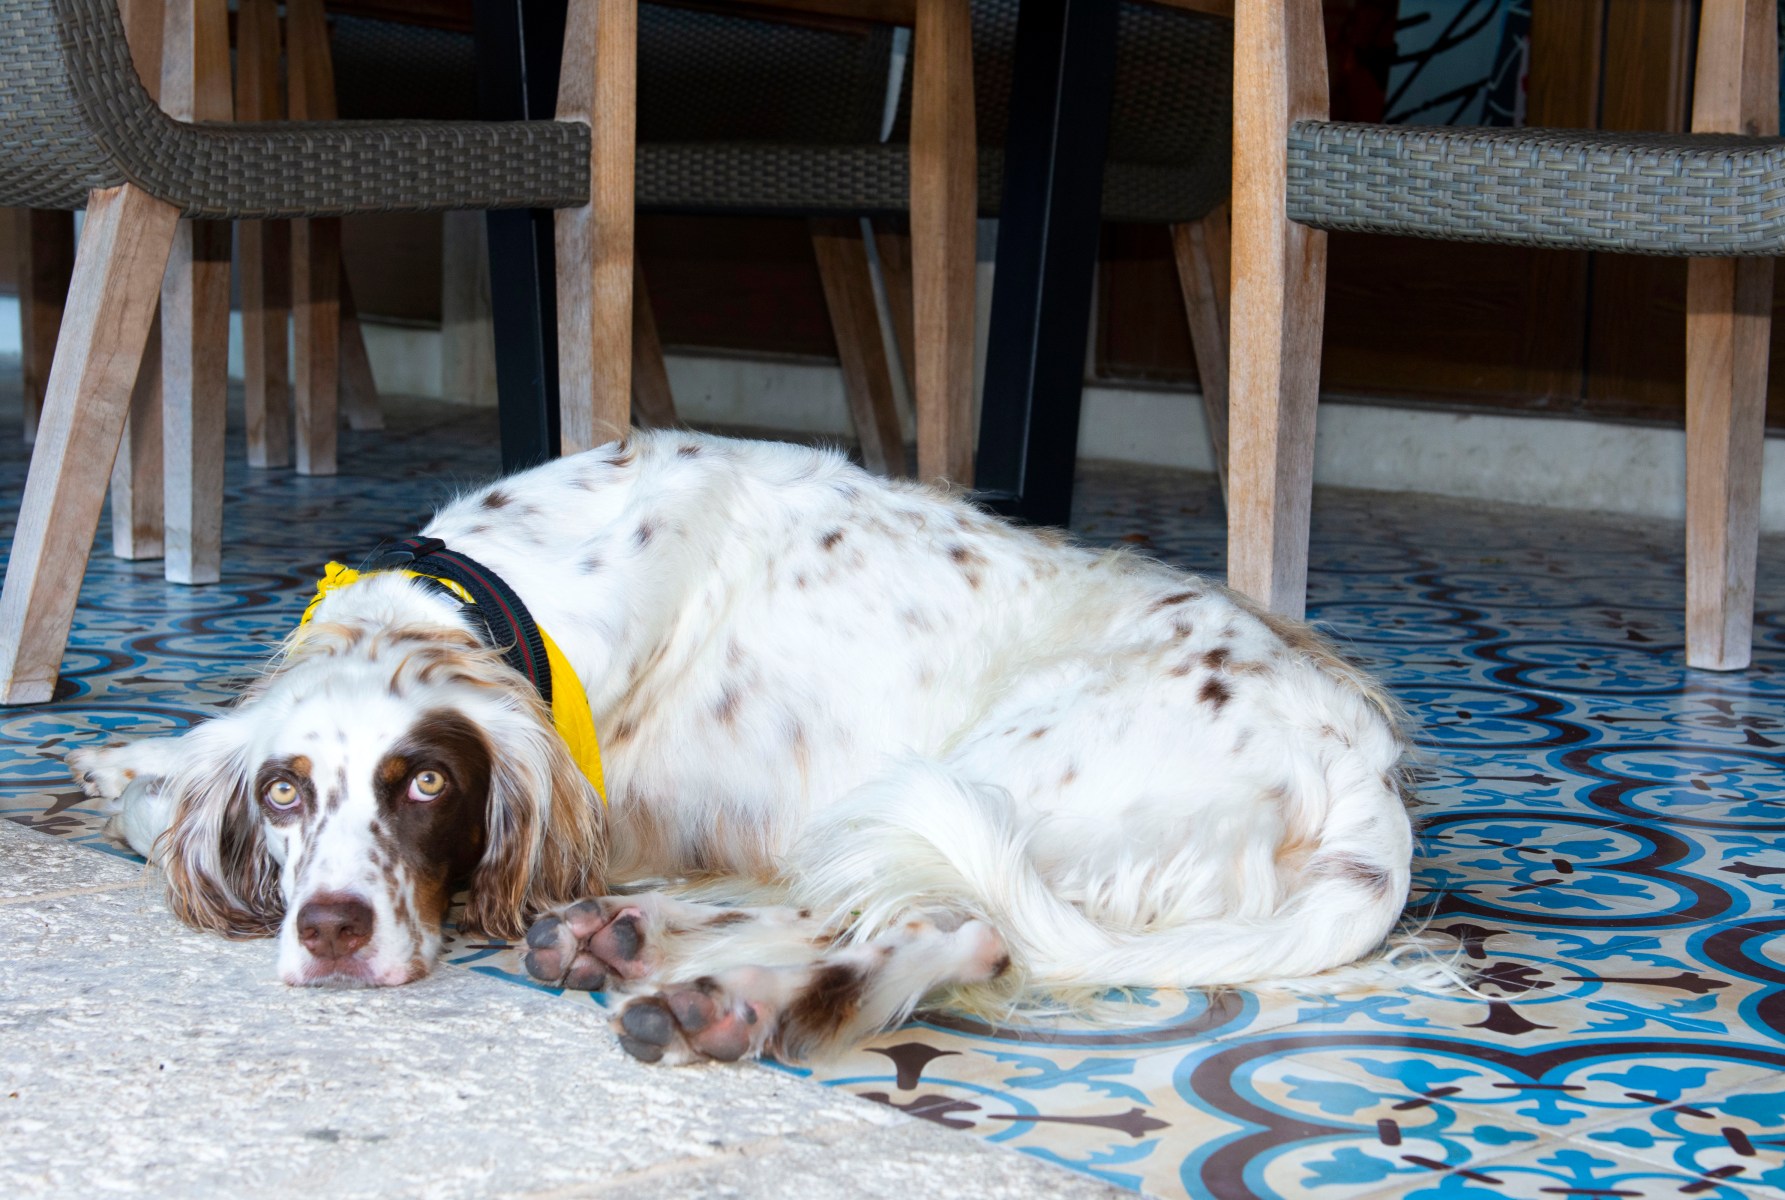 Grutman’s English Setter, Charlie, has no time for your nonsense as he reclines on Grutman’s Cuban-inspired tile.